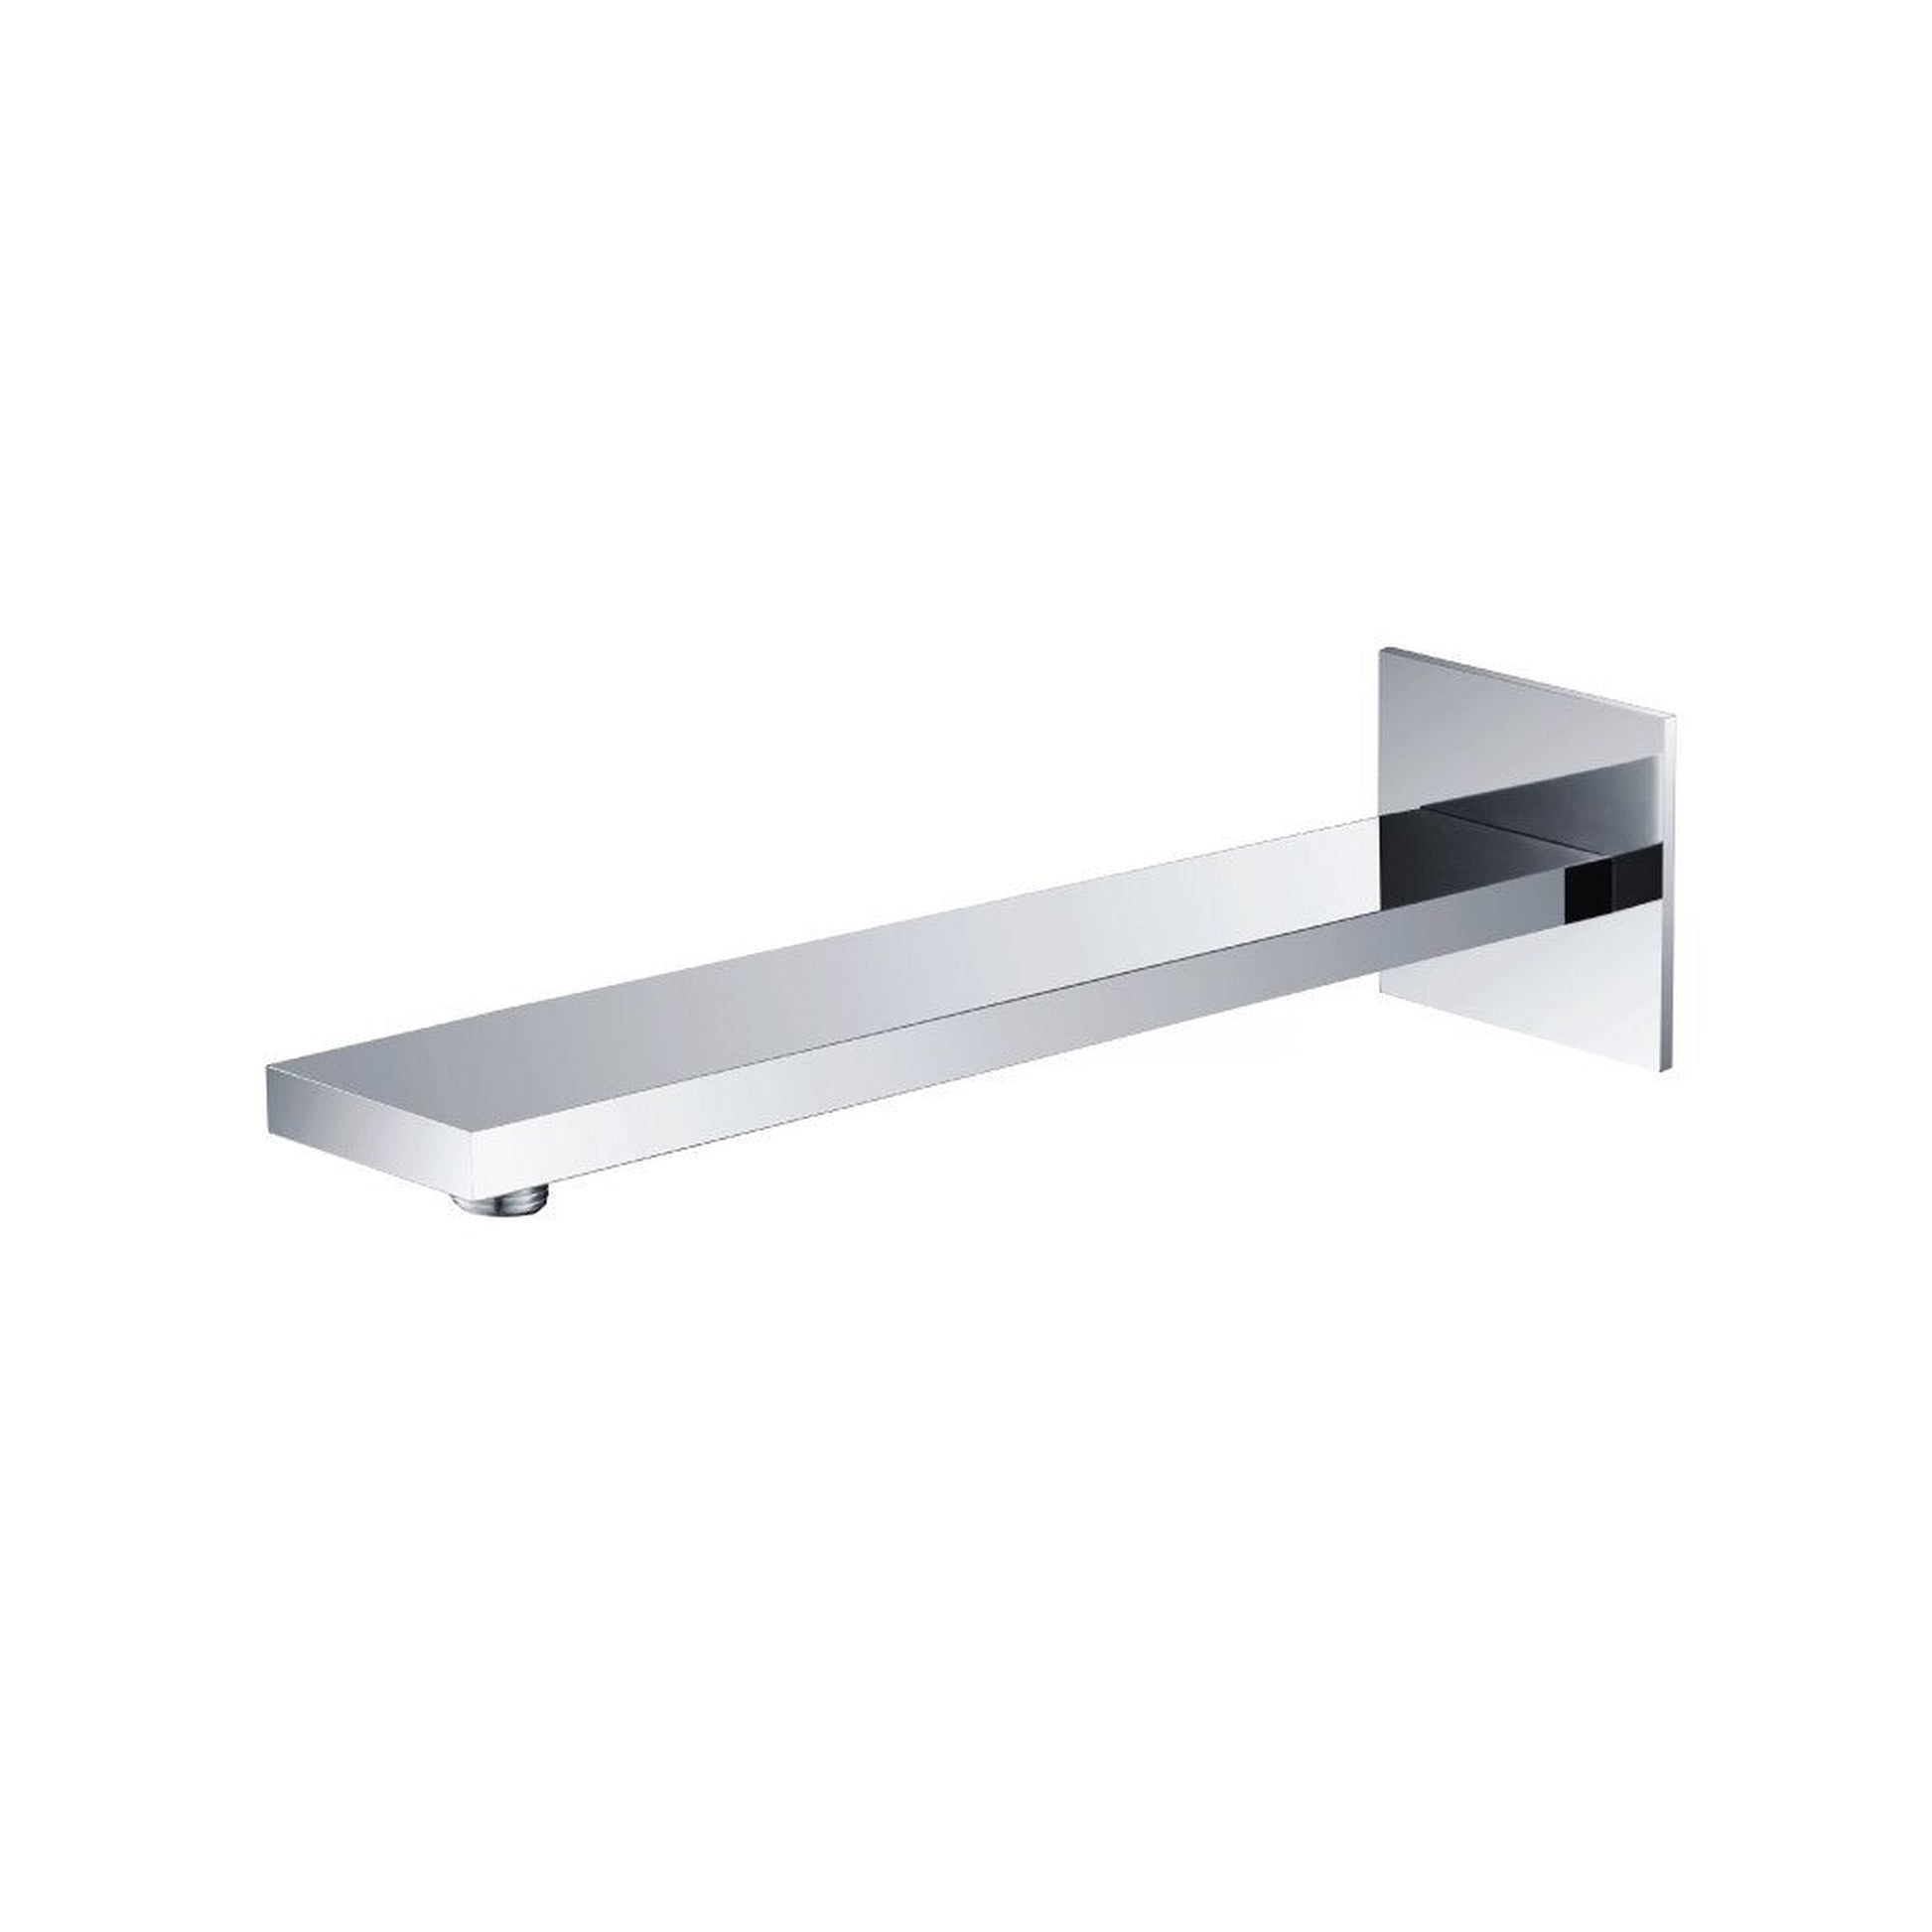 Isenberg Universal Fixtures 16" Brushed Nickel PVD Solid Brass Wall-Mounted Shower Arm With Square Sliding Flange